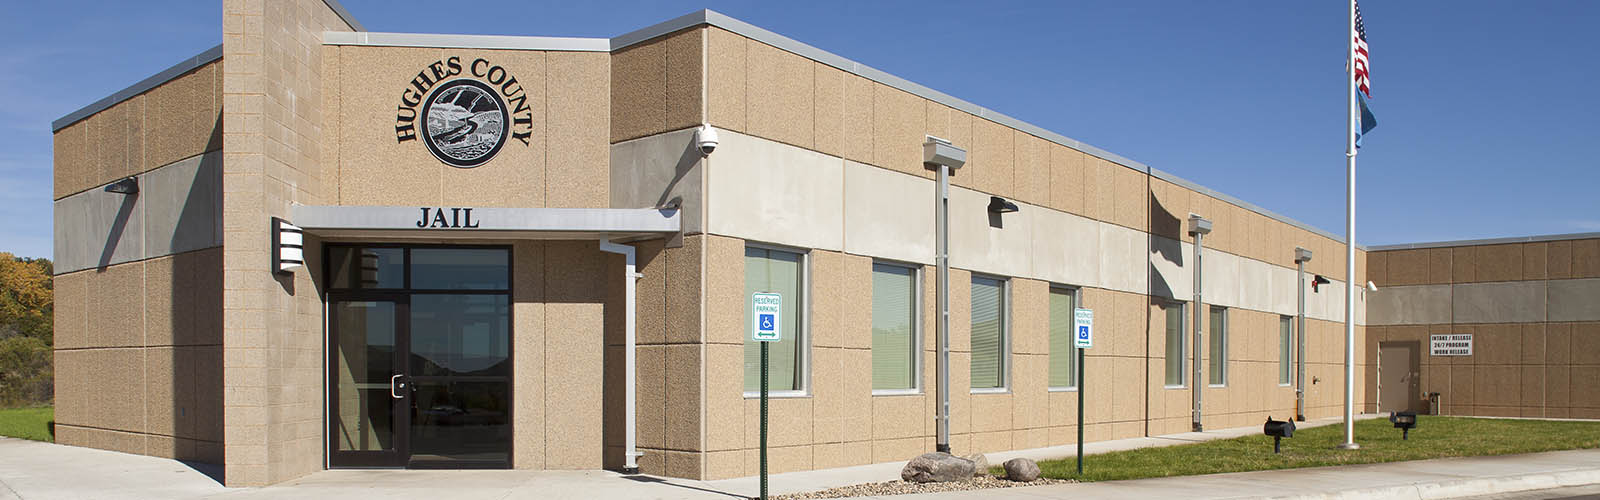 Image of Hughes County Jail